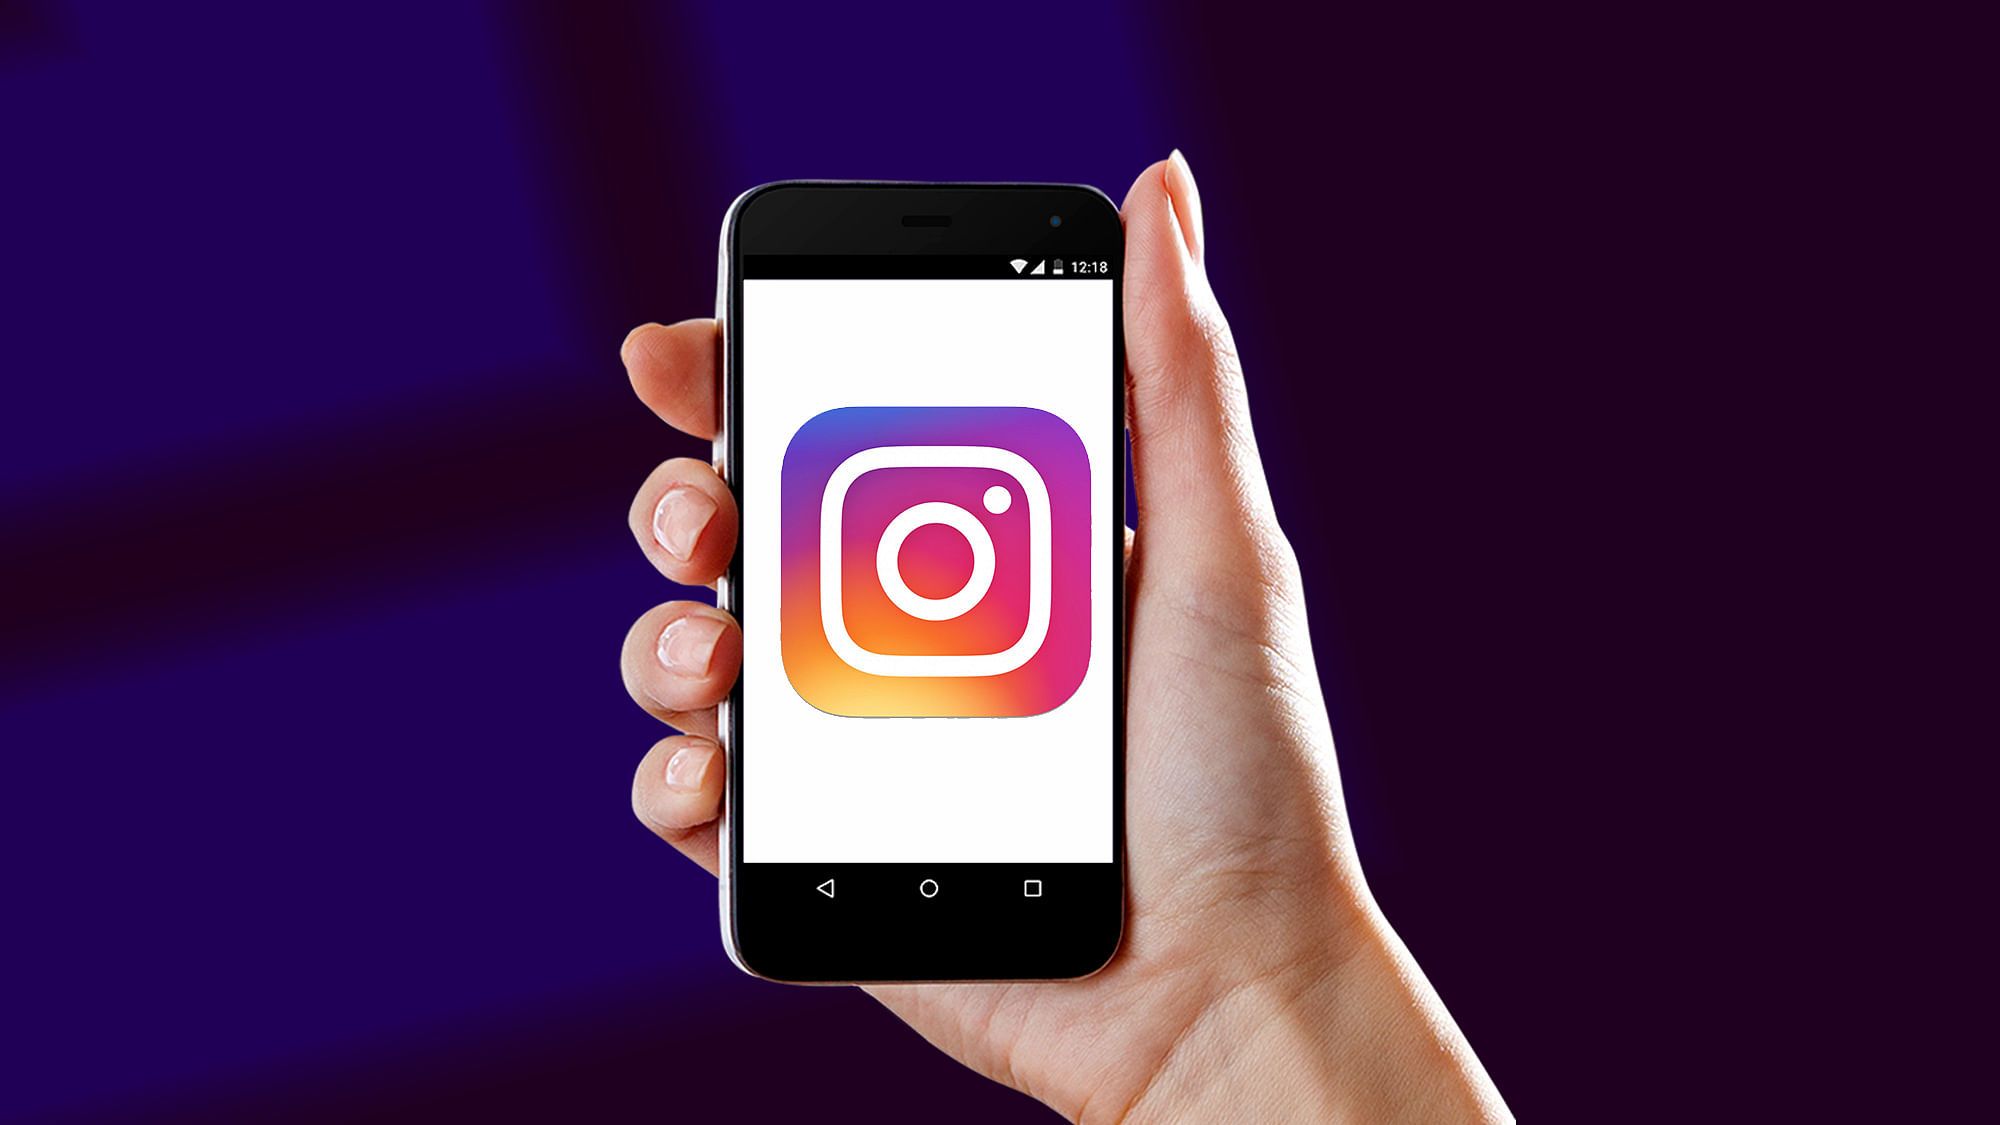 Instagram wants to change the way people view its platform.